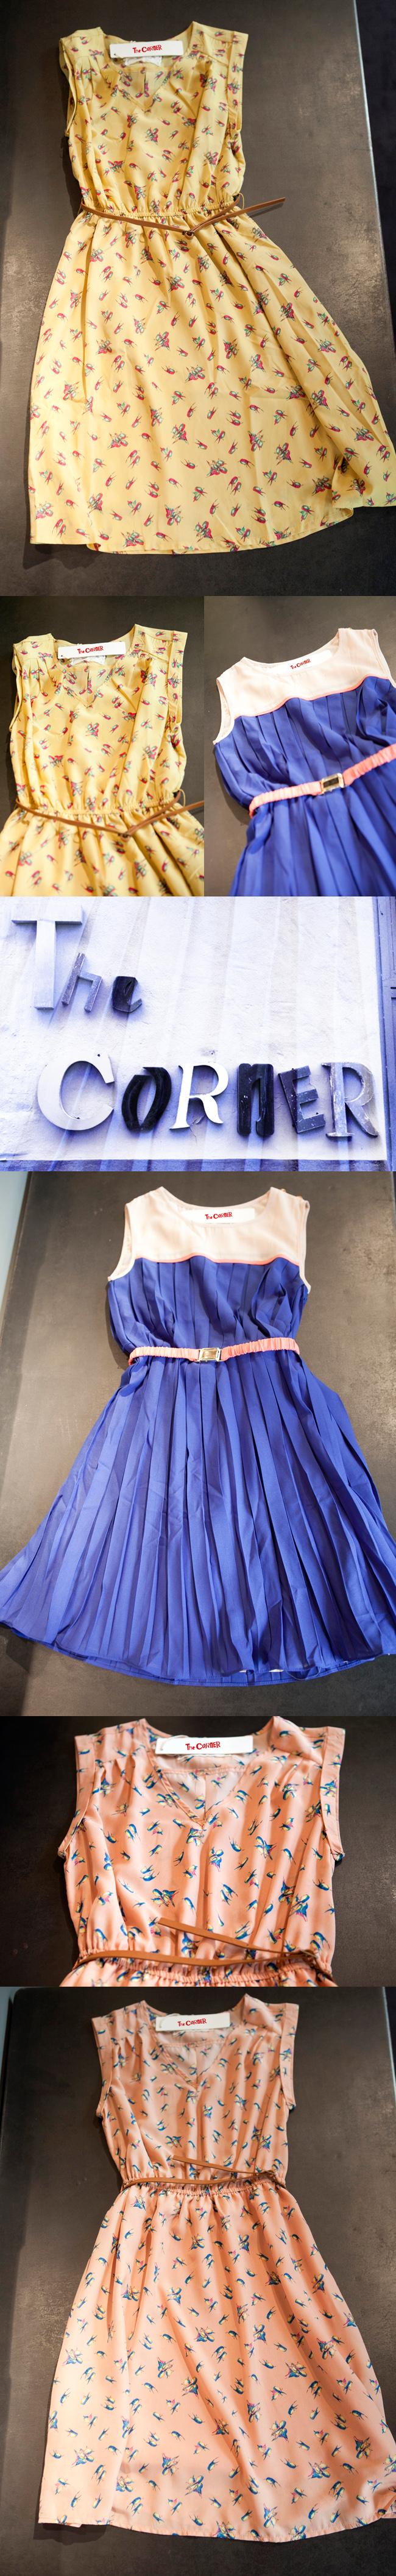 special long dress by the corner